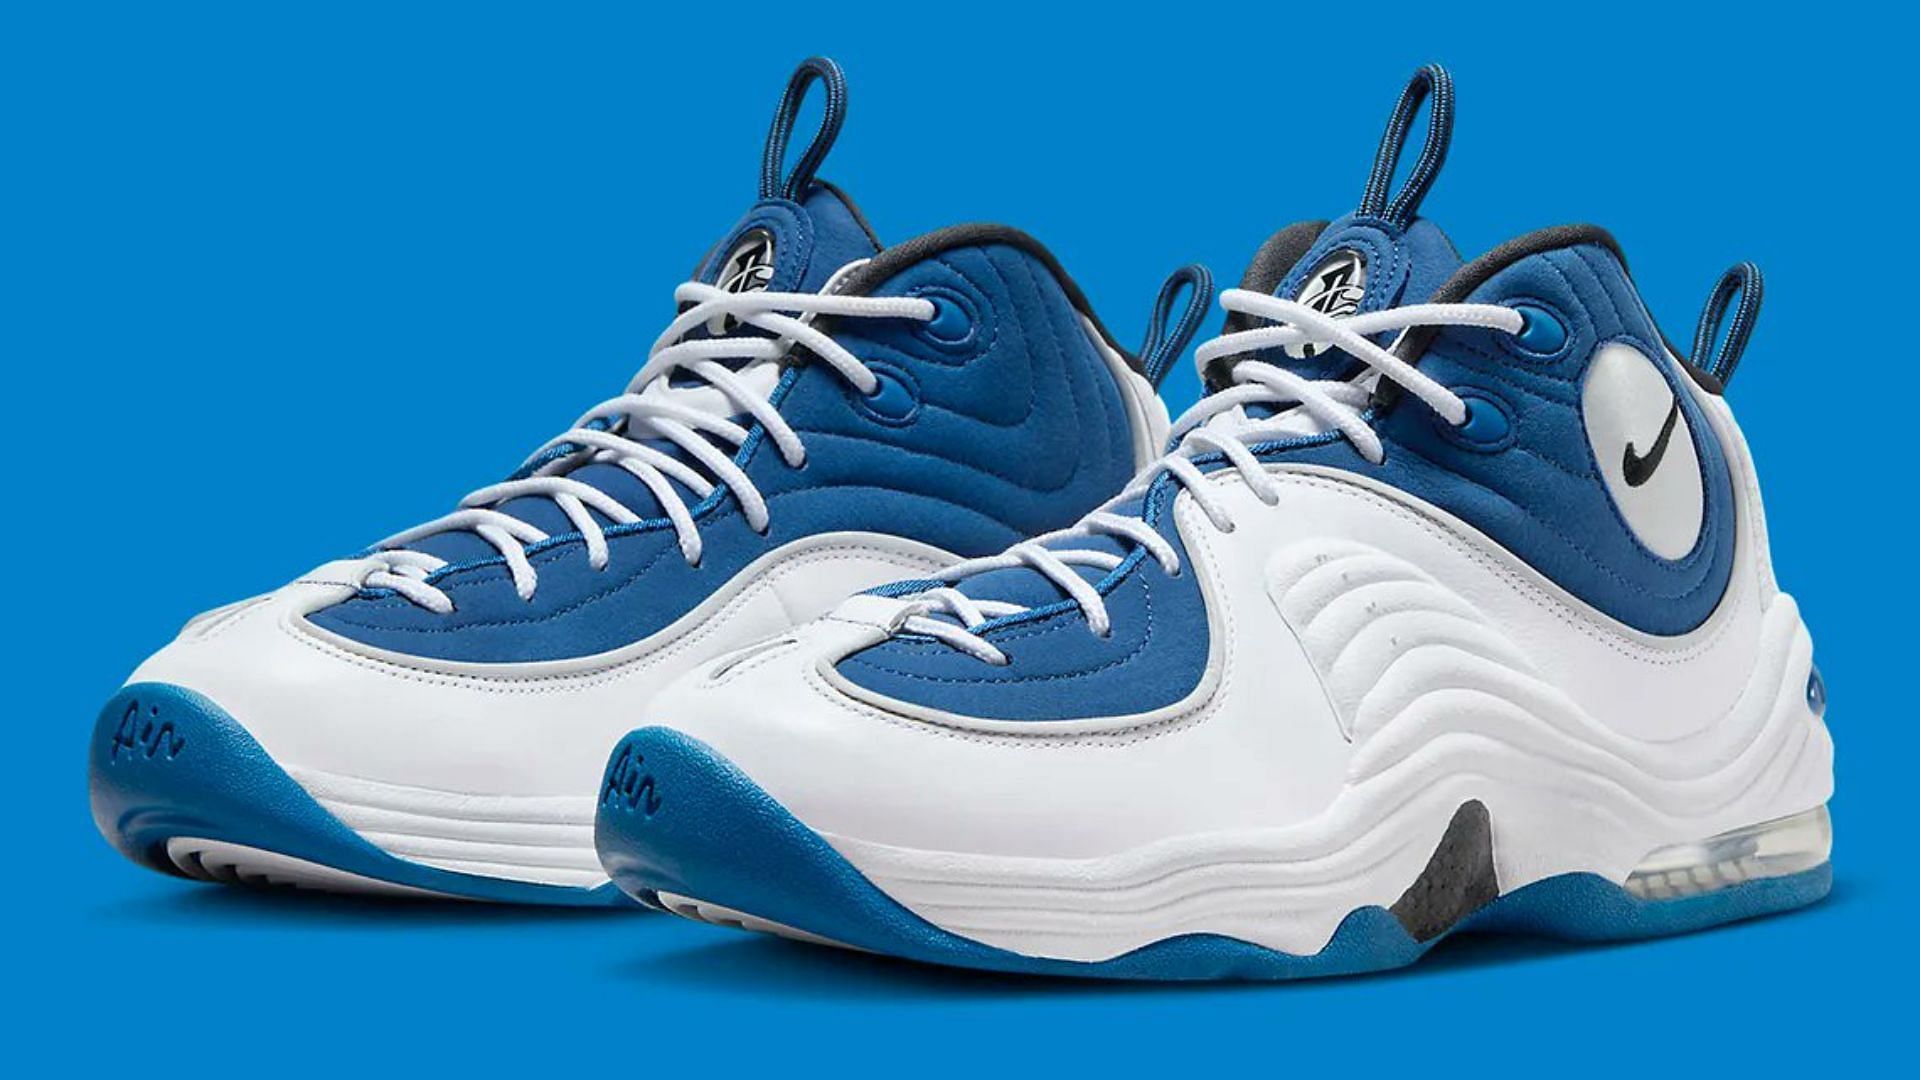 Nike Brought Back Penny Hardaway's Sneakers From the Late '90s